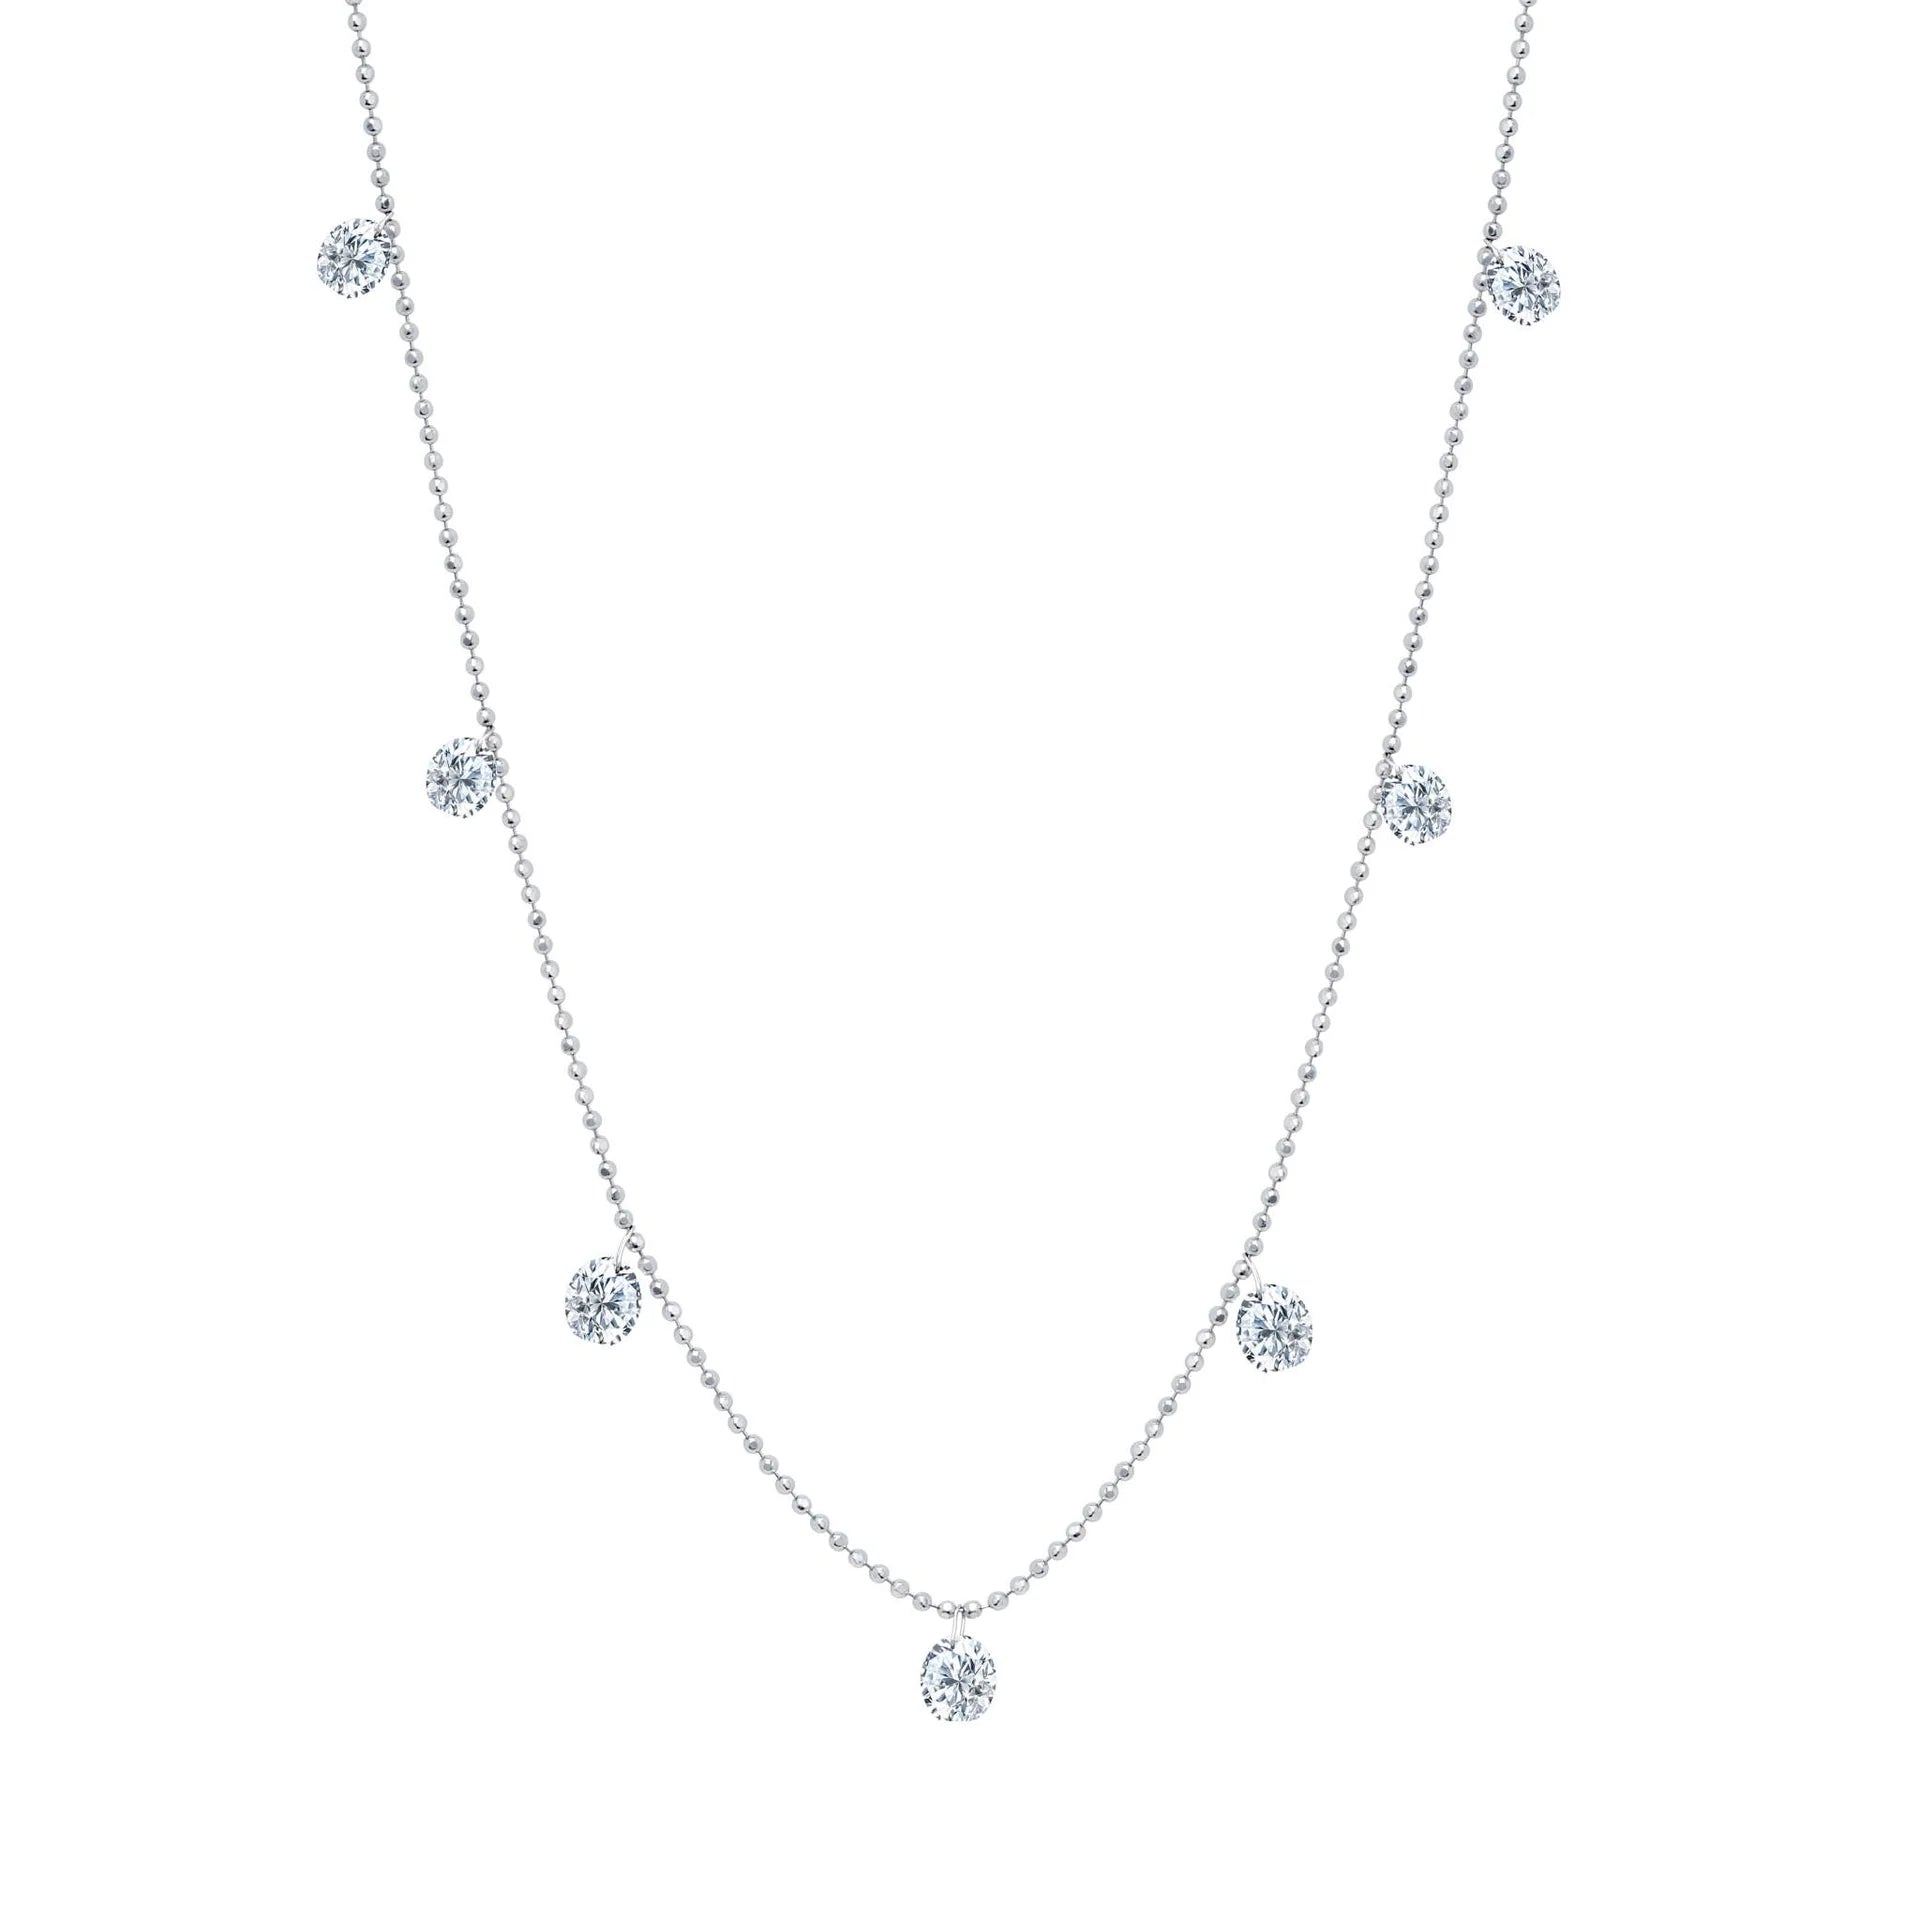 “Floating Diamonds” Necklace, Small, White Gold